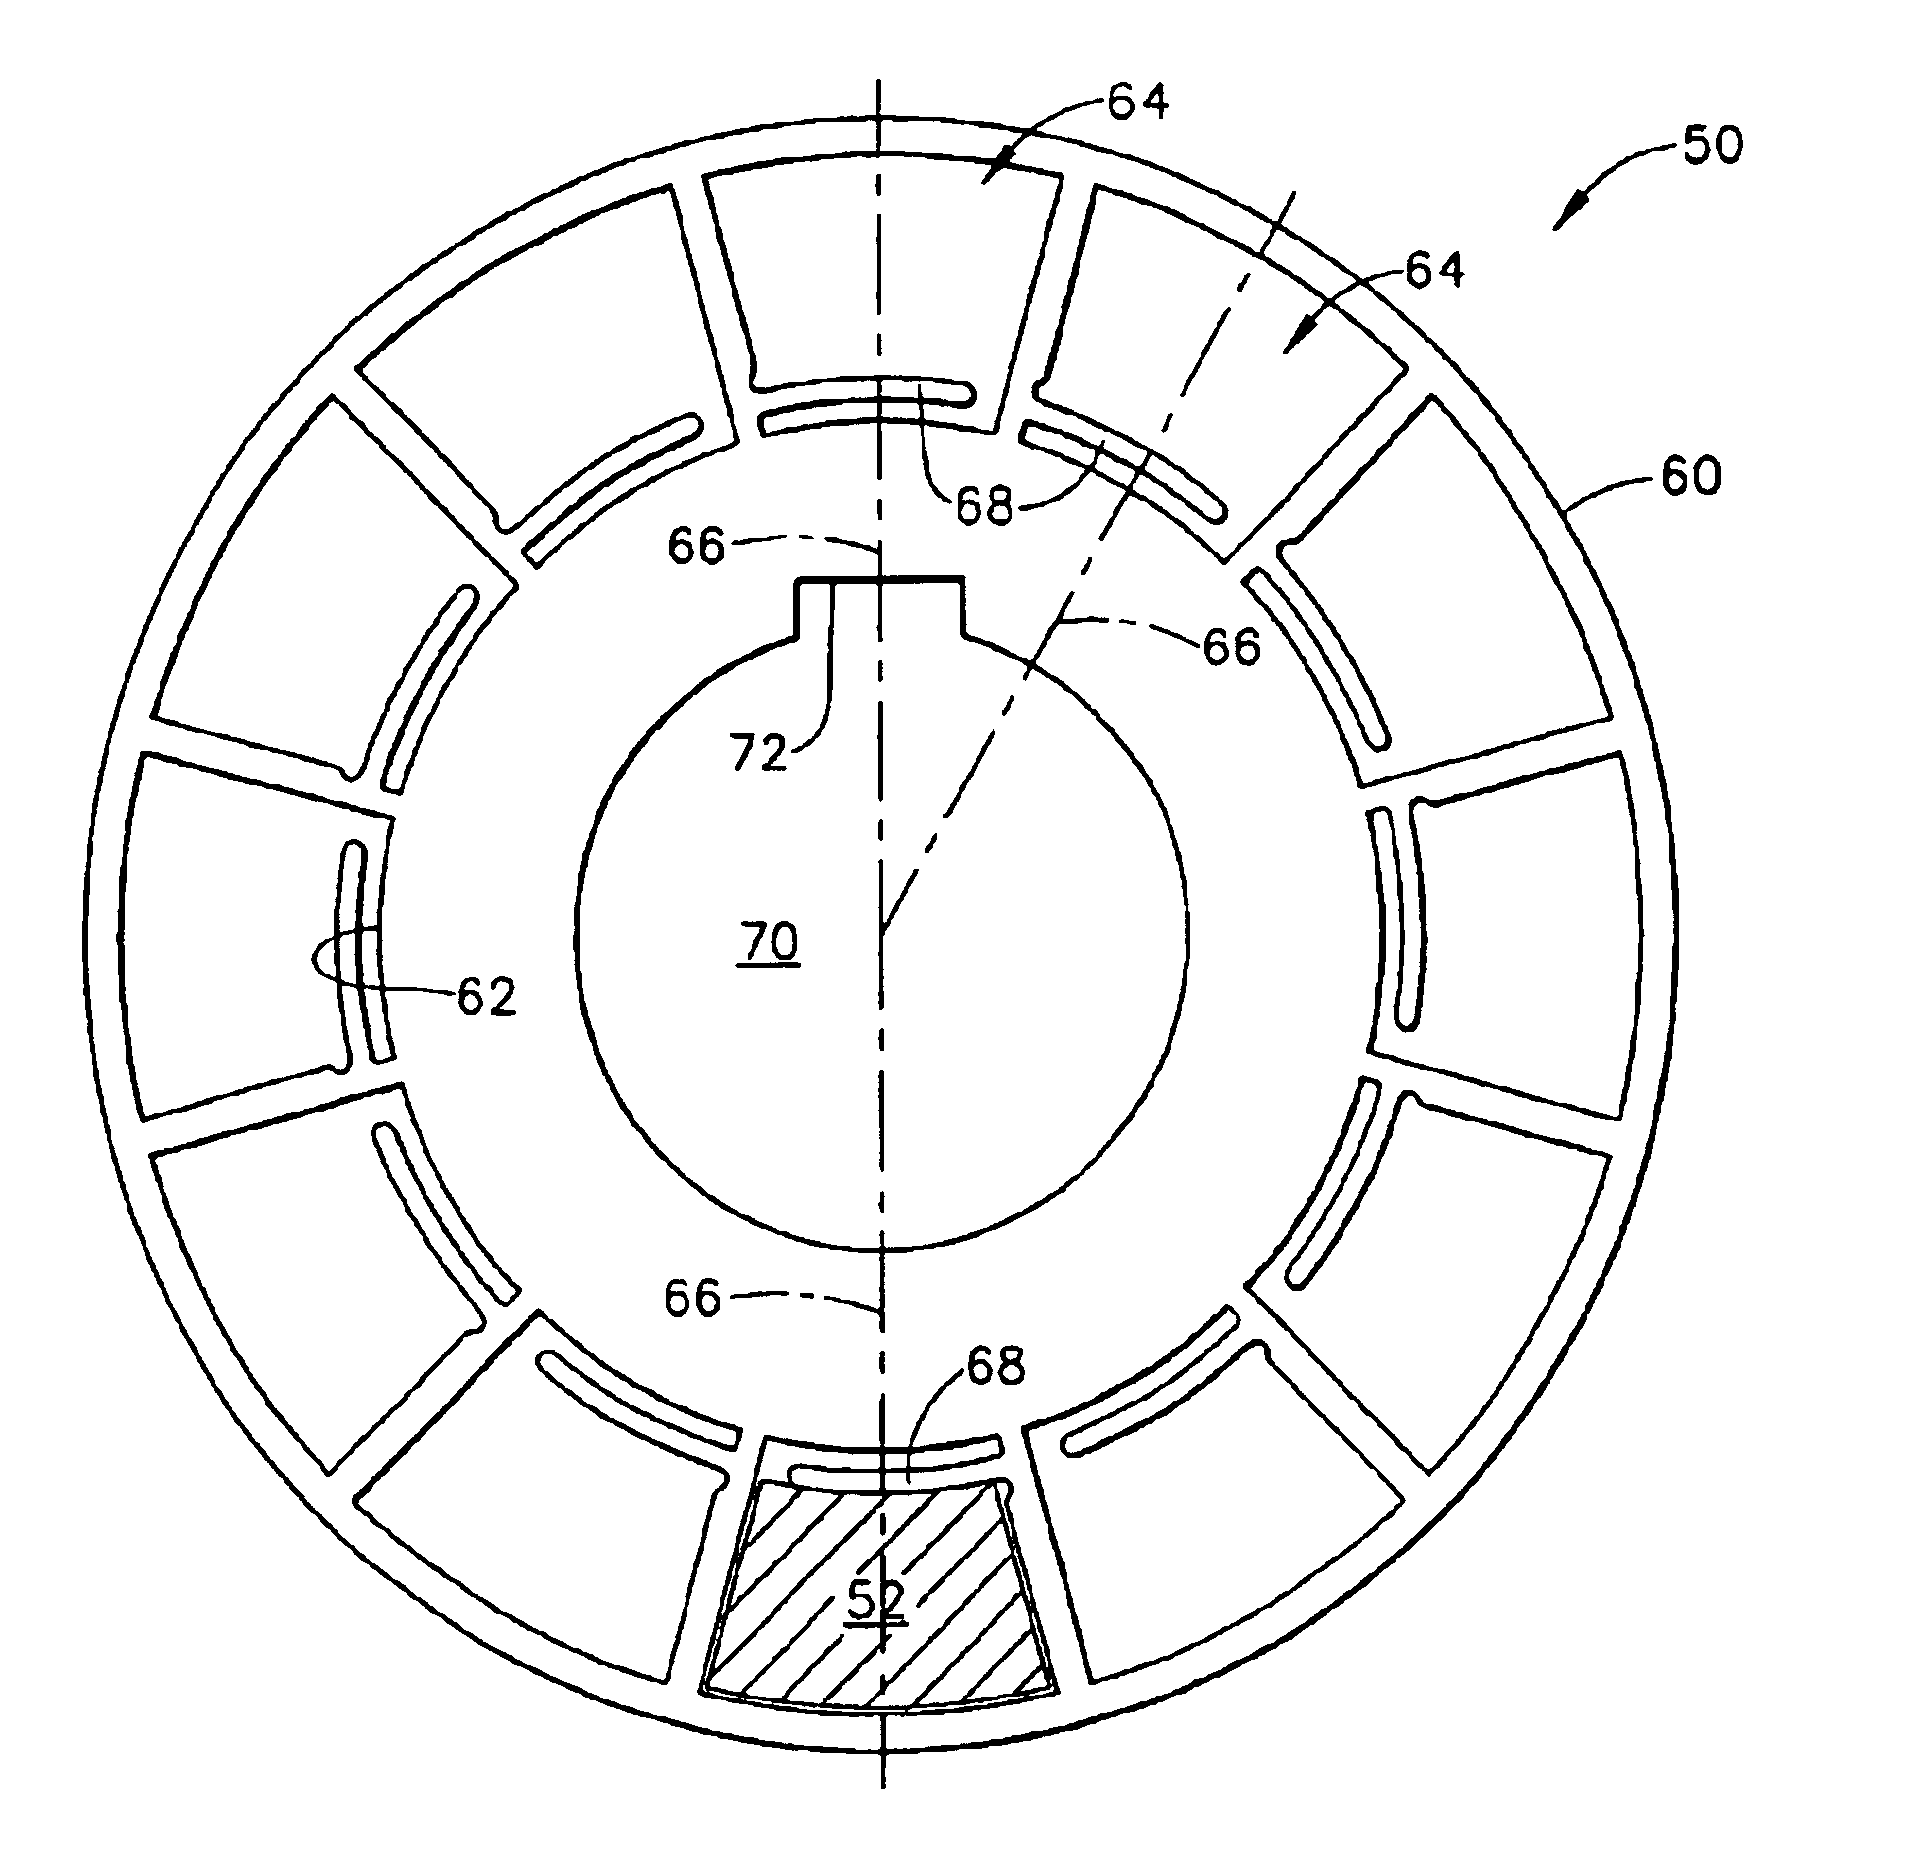 Method and apparatus for reducing dynamo-electric machine vibration